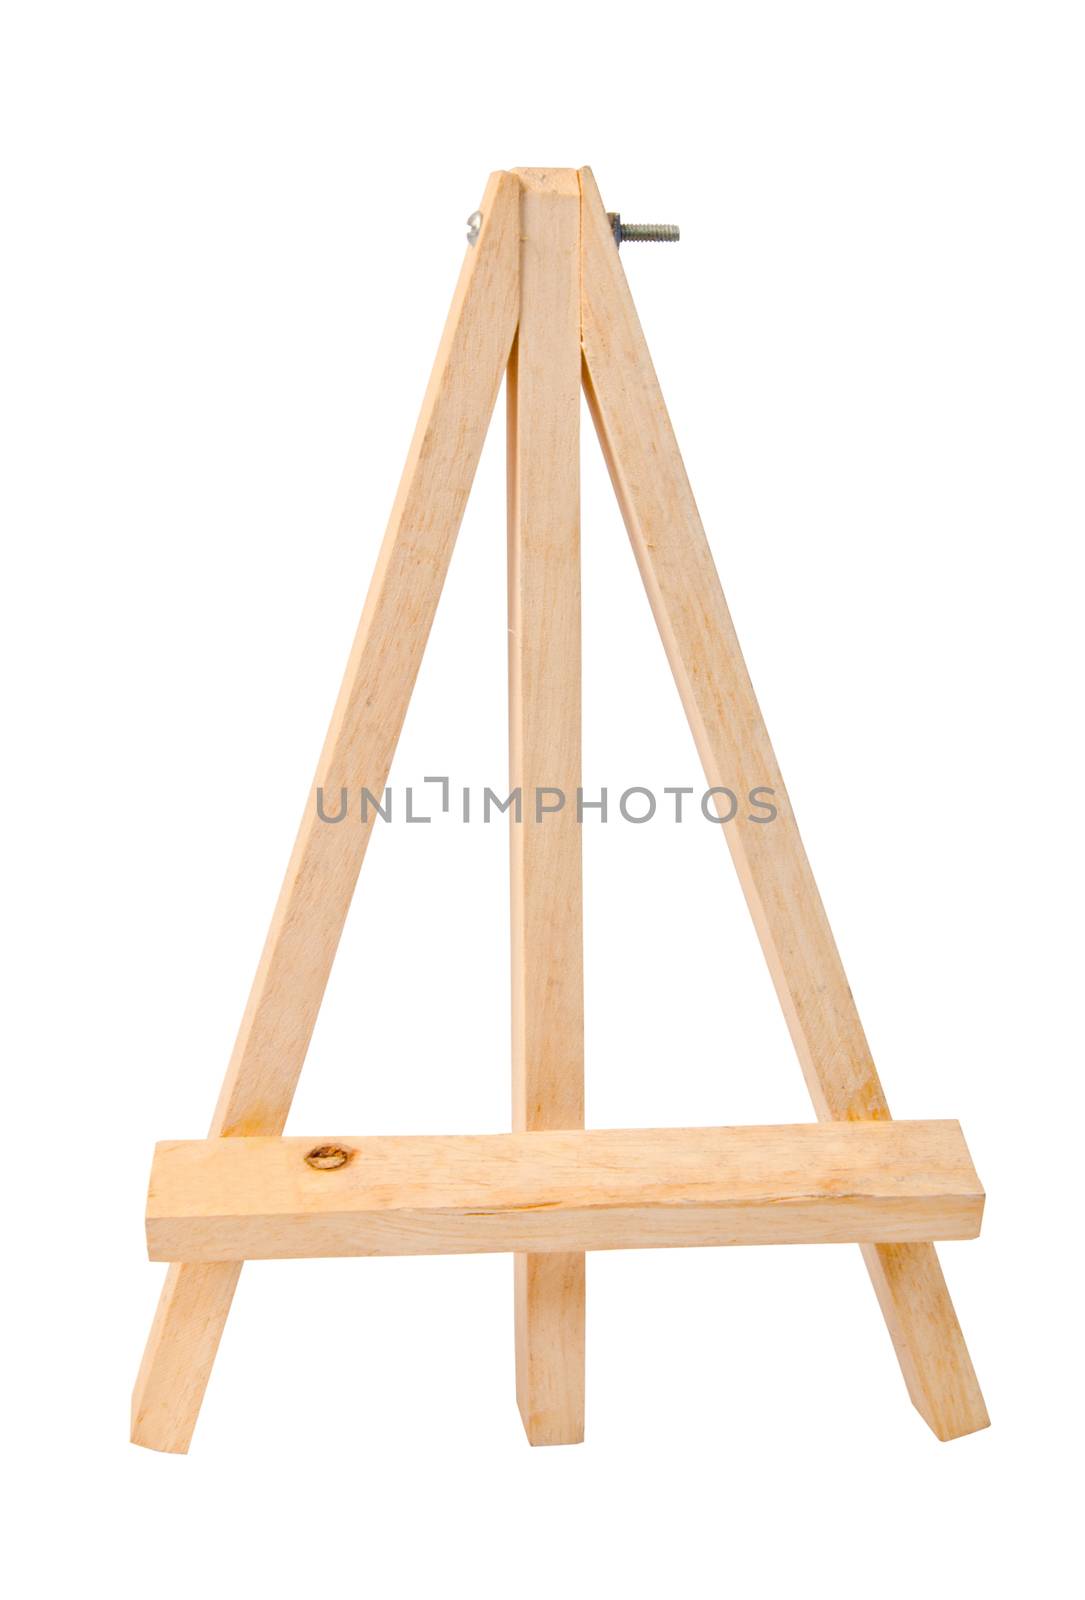 Small tripod for painting without canvas, clipping path